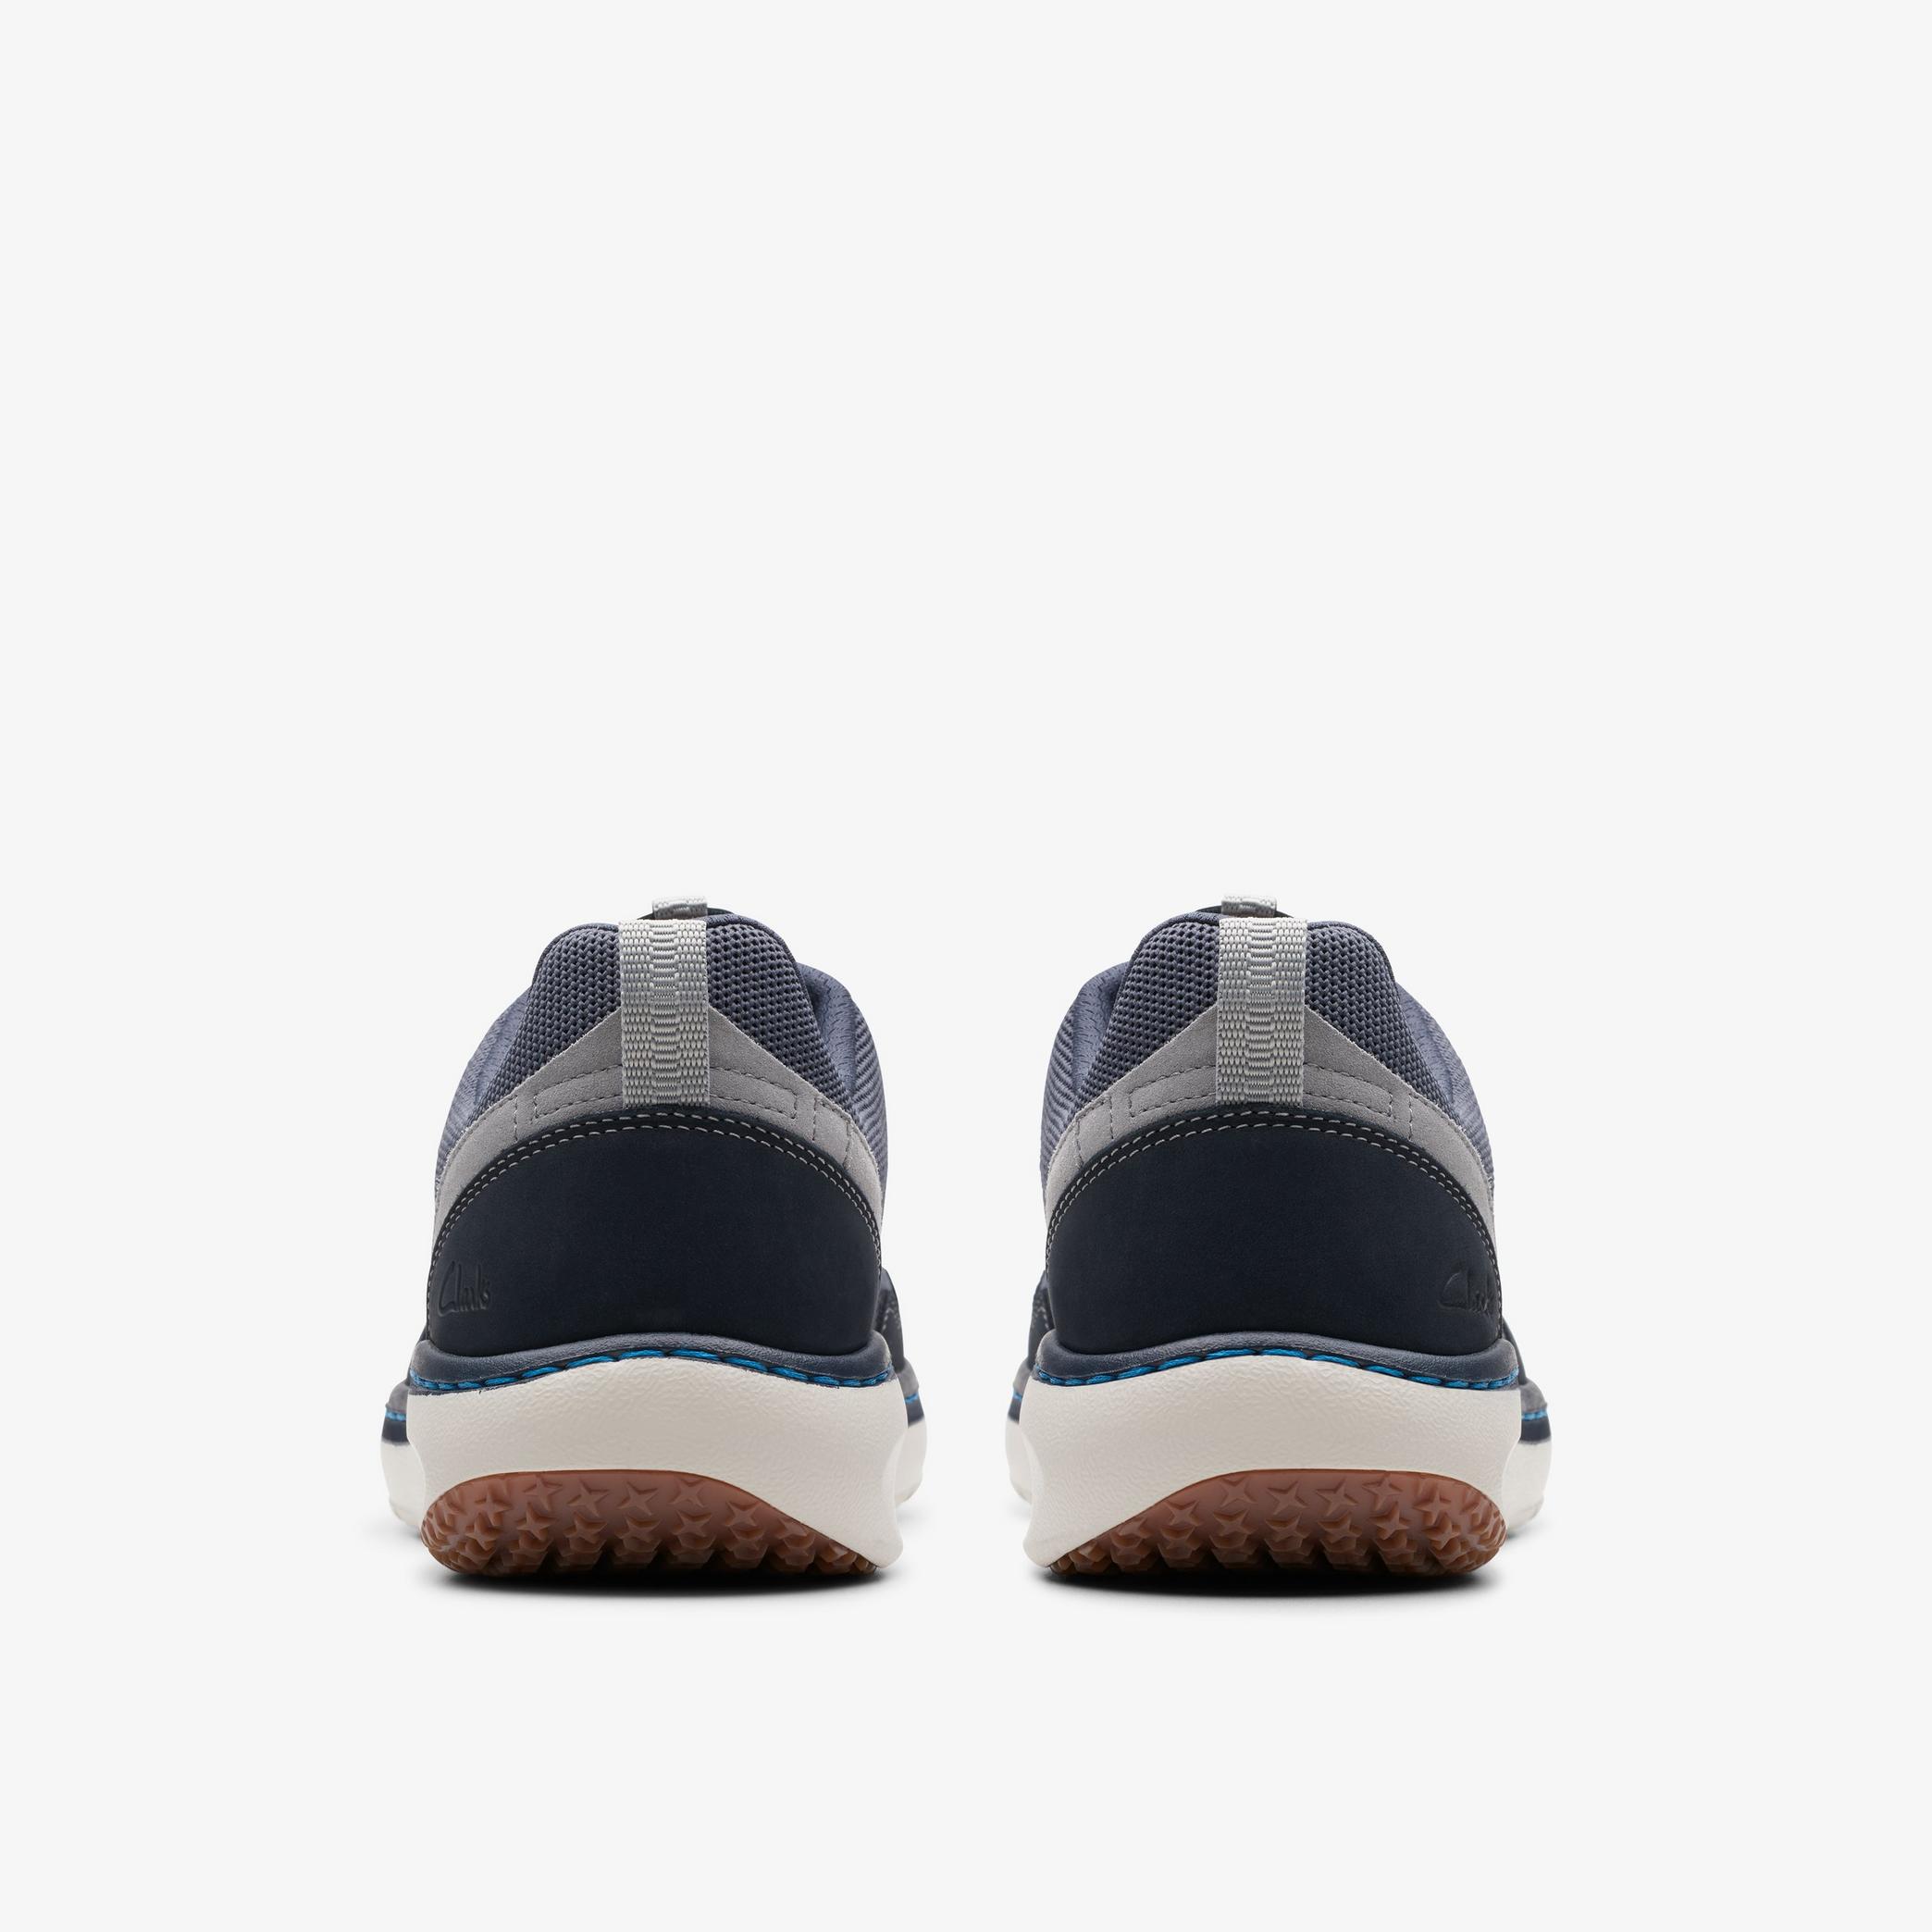 Clarks Pro Knit Navy Combination Sneakers, view 5 of 6